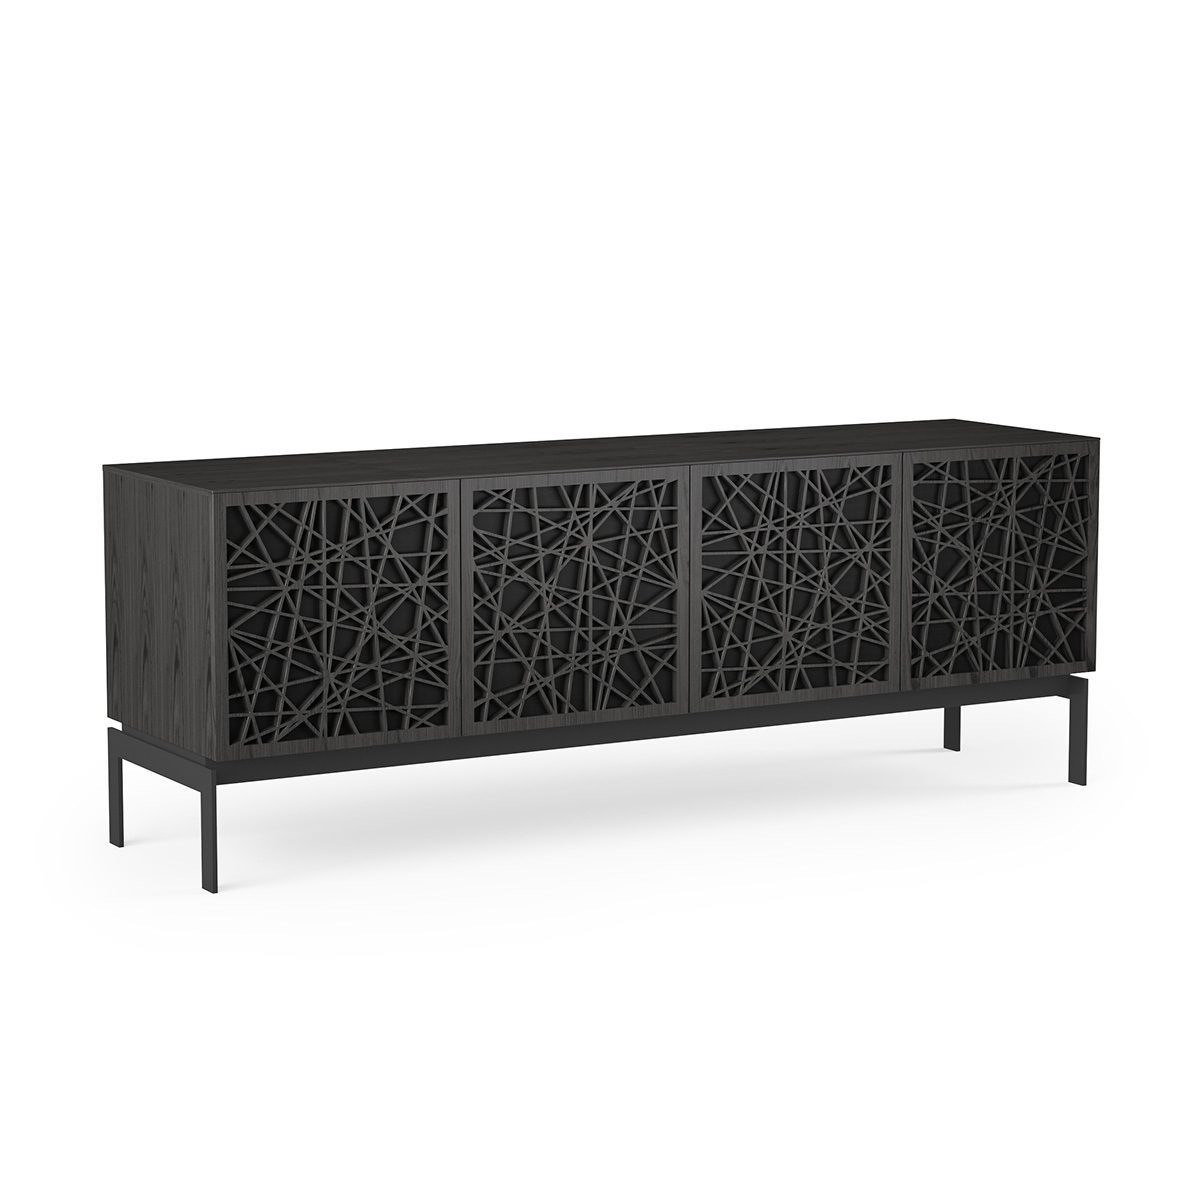 BDI Elements 8779 Ricochet Charcoal Stained Ash Console Unit